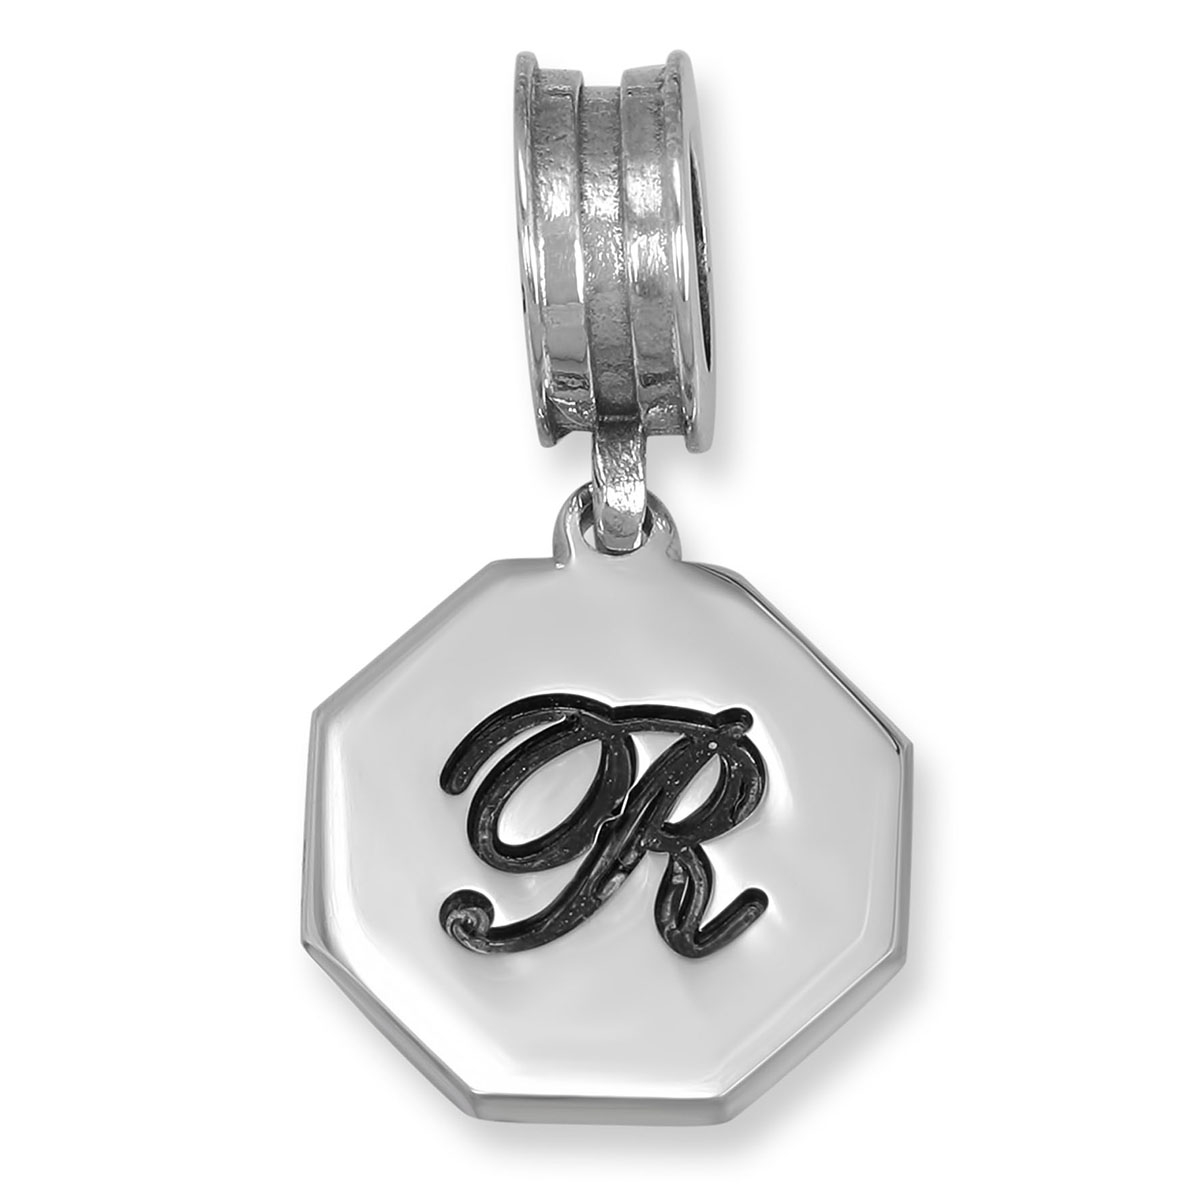 Octagon Sterling Silver Script Initial Charm (English / Hebrew)  - 1